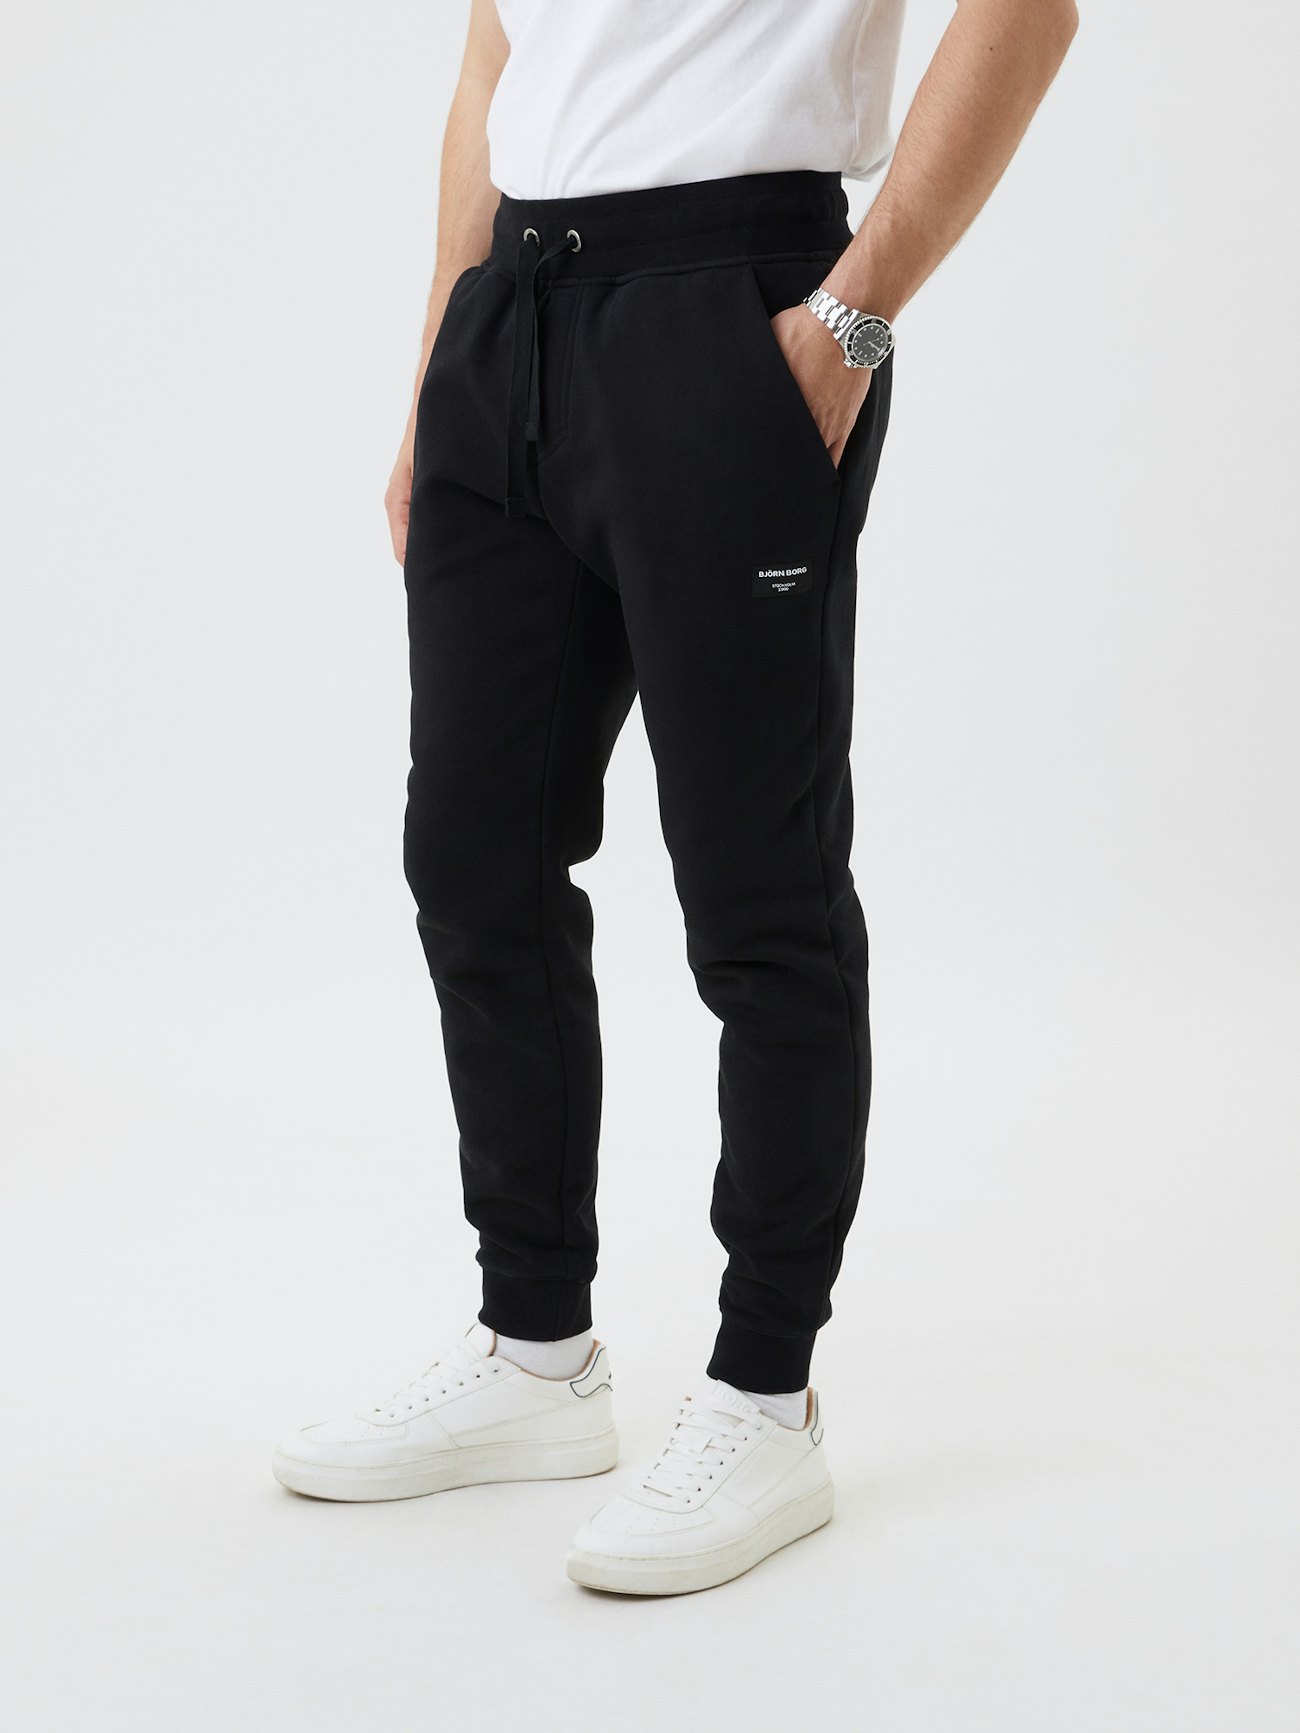 Centre Tapered Pant - Black Beauty